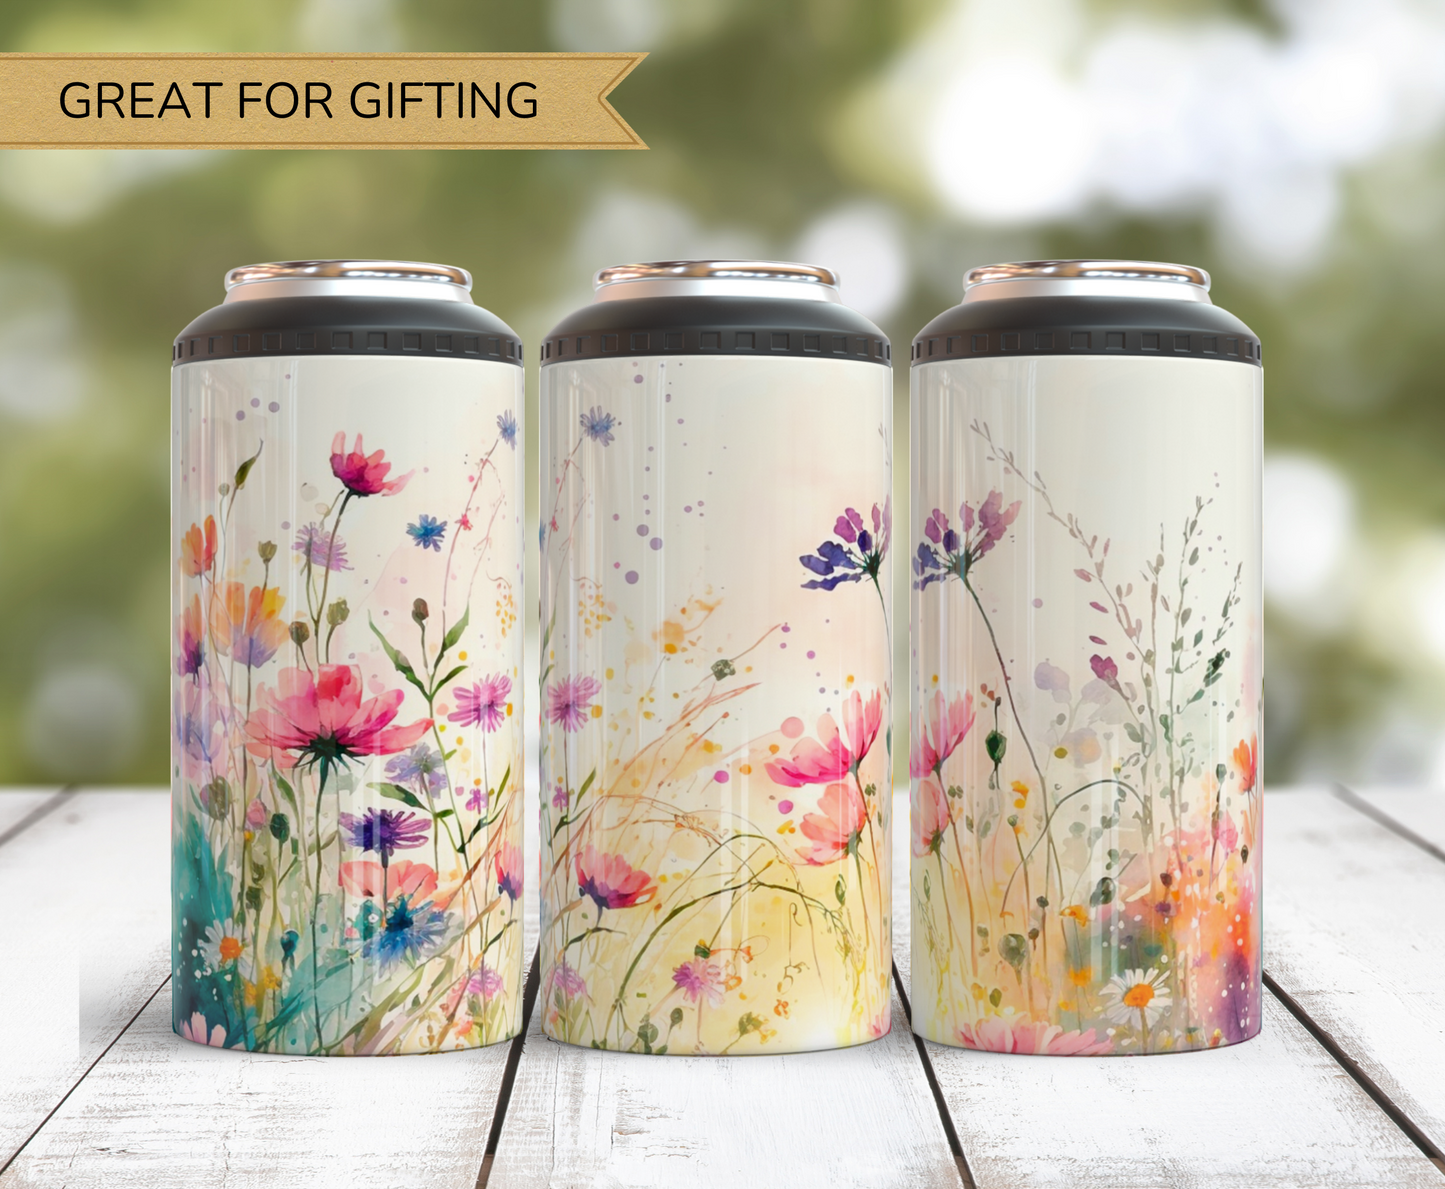 Can Cooler 4 in 1 | Wildflowers